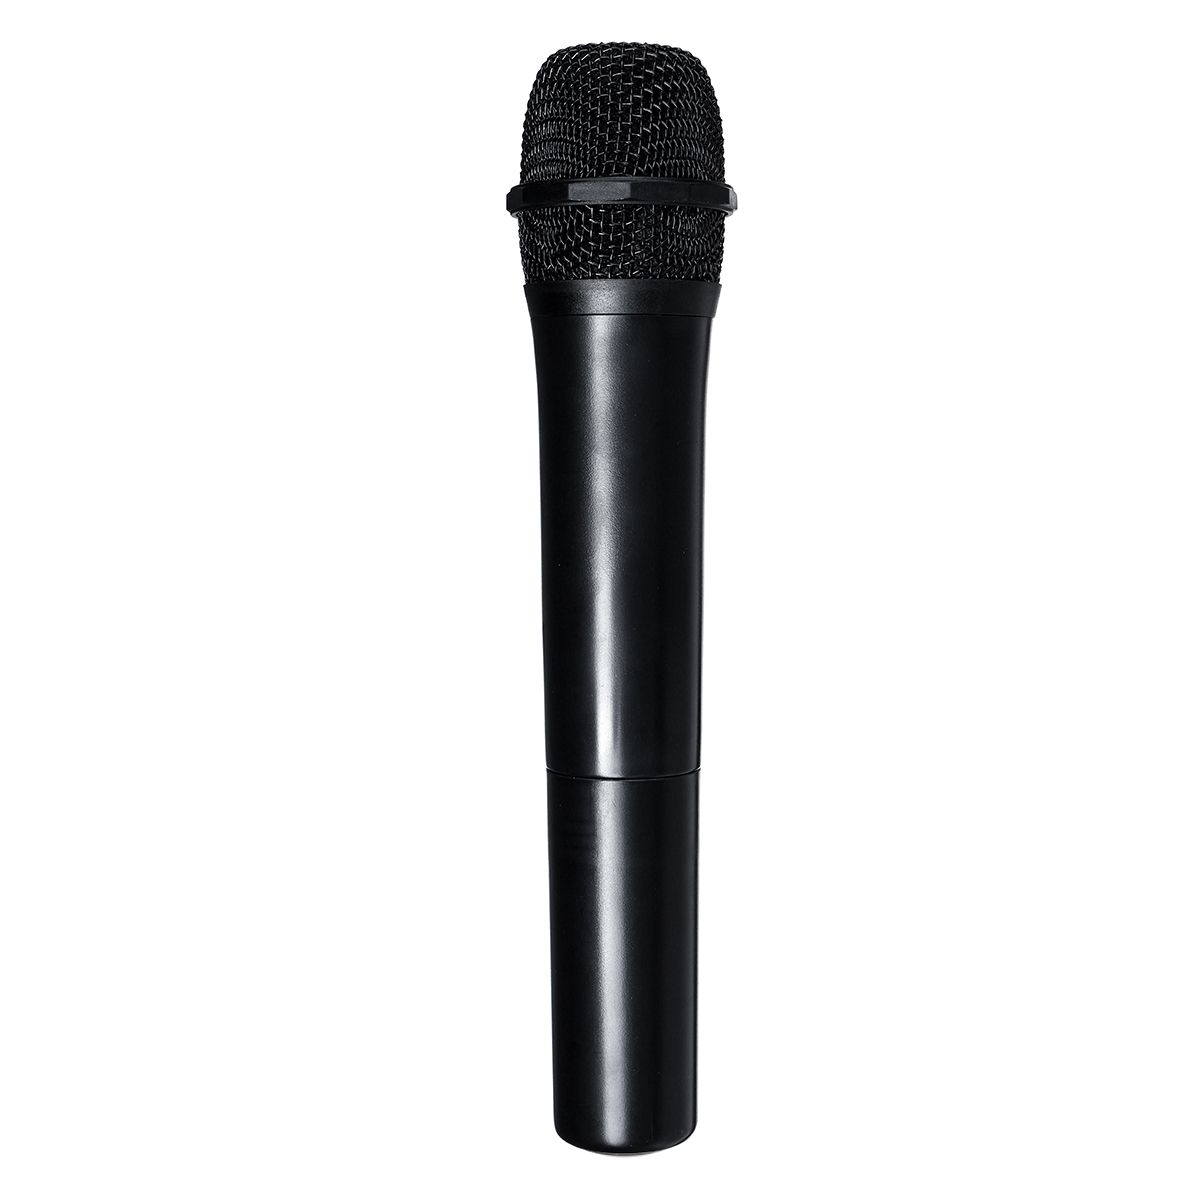 Professional-UHF-Wireless-Microphone-Handheld-Mic-System-Karaoke-With-Receiver-1594314